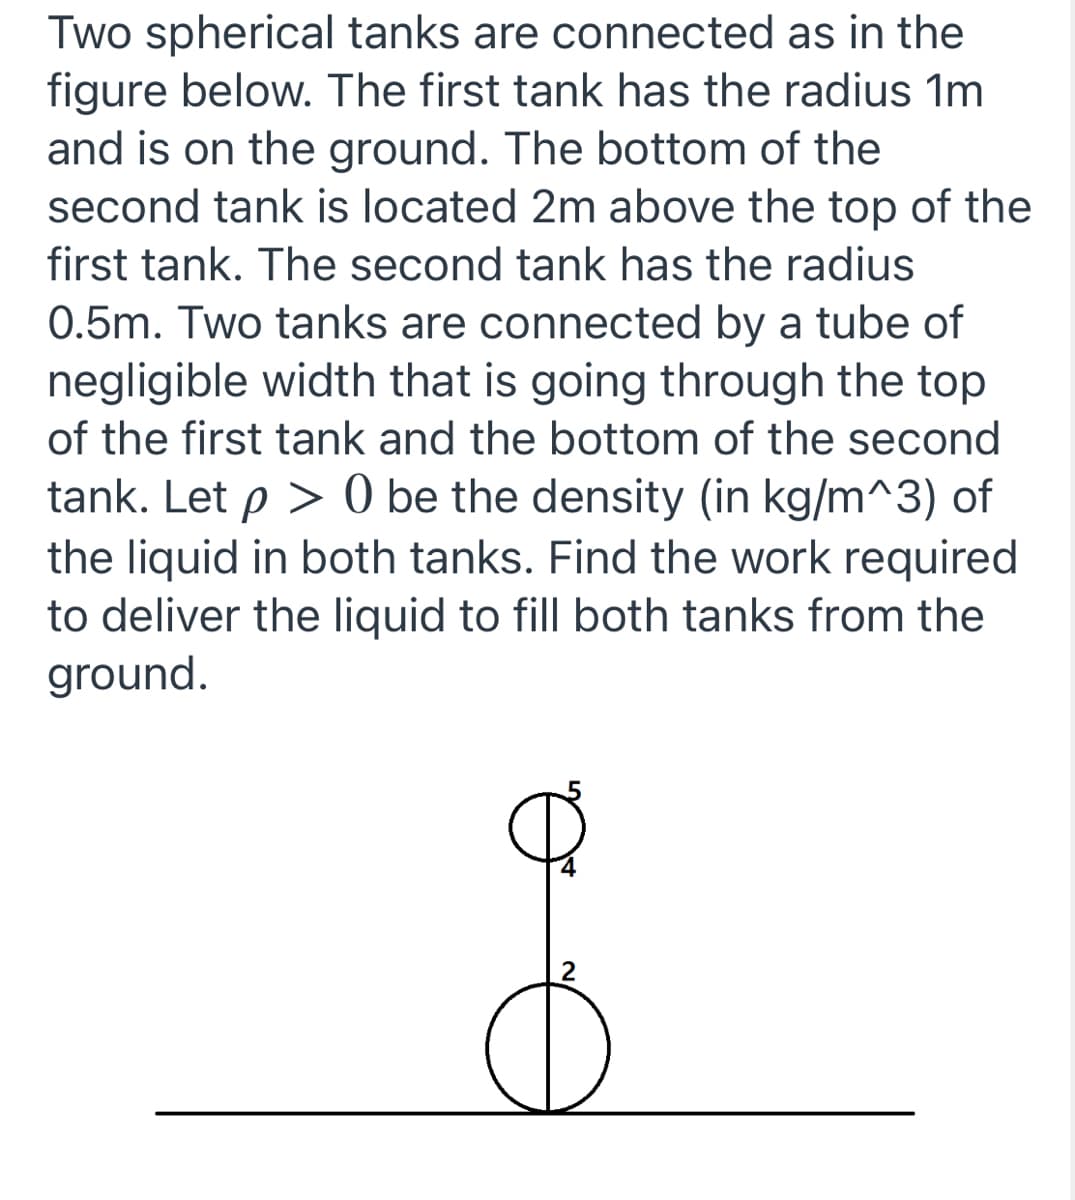 Two spherical tanks are connected as in the
figure below. The first tank has the radius 1m
and is on the ground. The bottom of the
second tank is located 2m above the top of the
first tank. The second tank has the radius
0.5m. Two tanks are connected by a tube of
negligible width that is going through the top
of the first tank and the bottom of the second
tank. Let p > 0 be the density (in kg/m^3) of
the liquid in both tanks. Find the work required
to deliver the liquid to fill both tanks from the
ground.
2